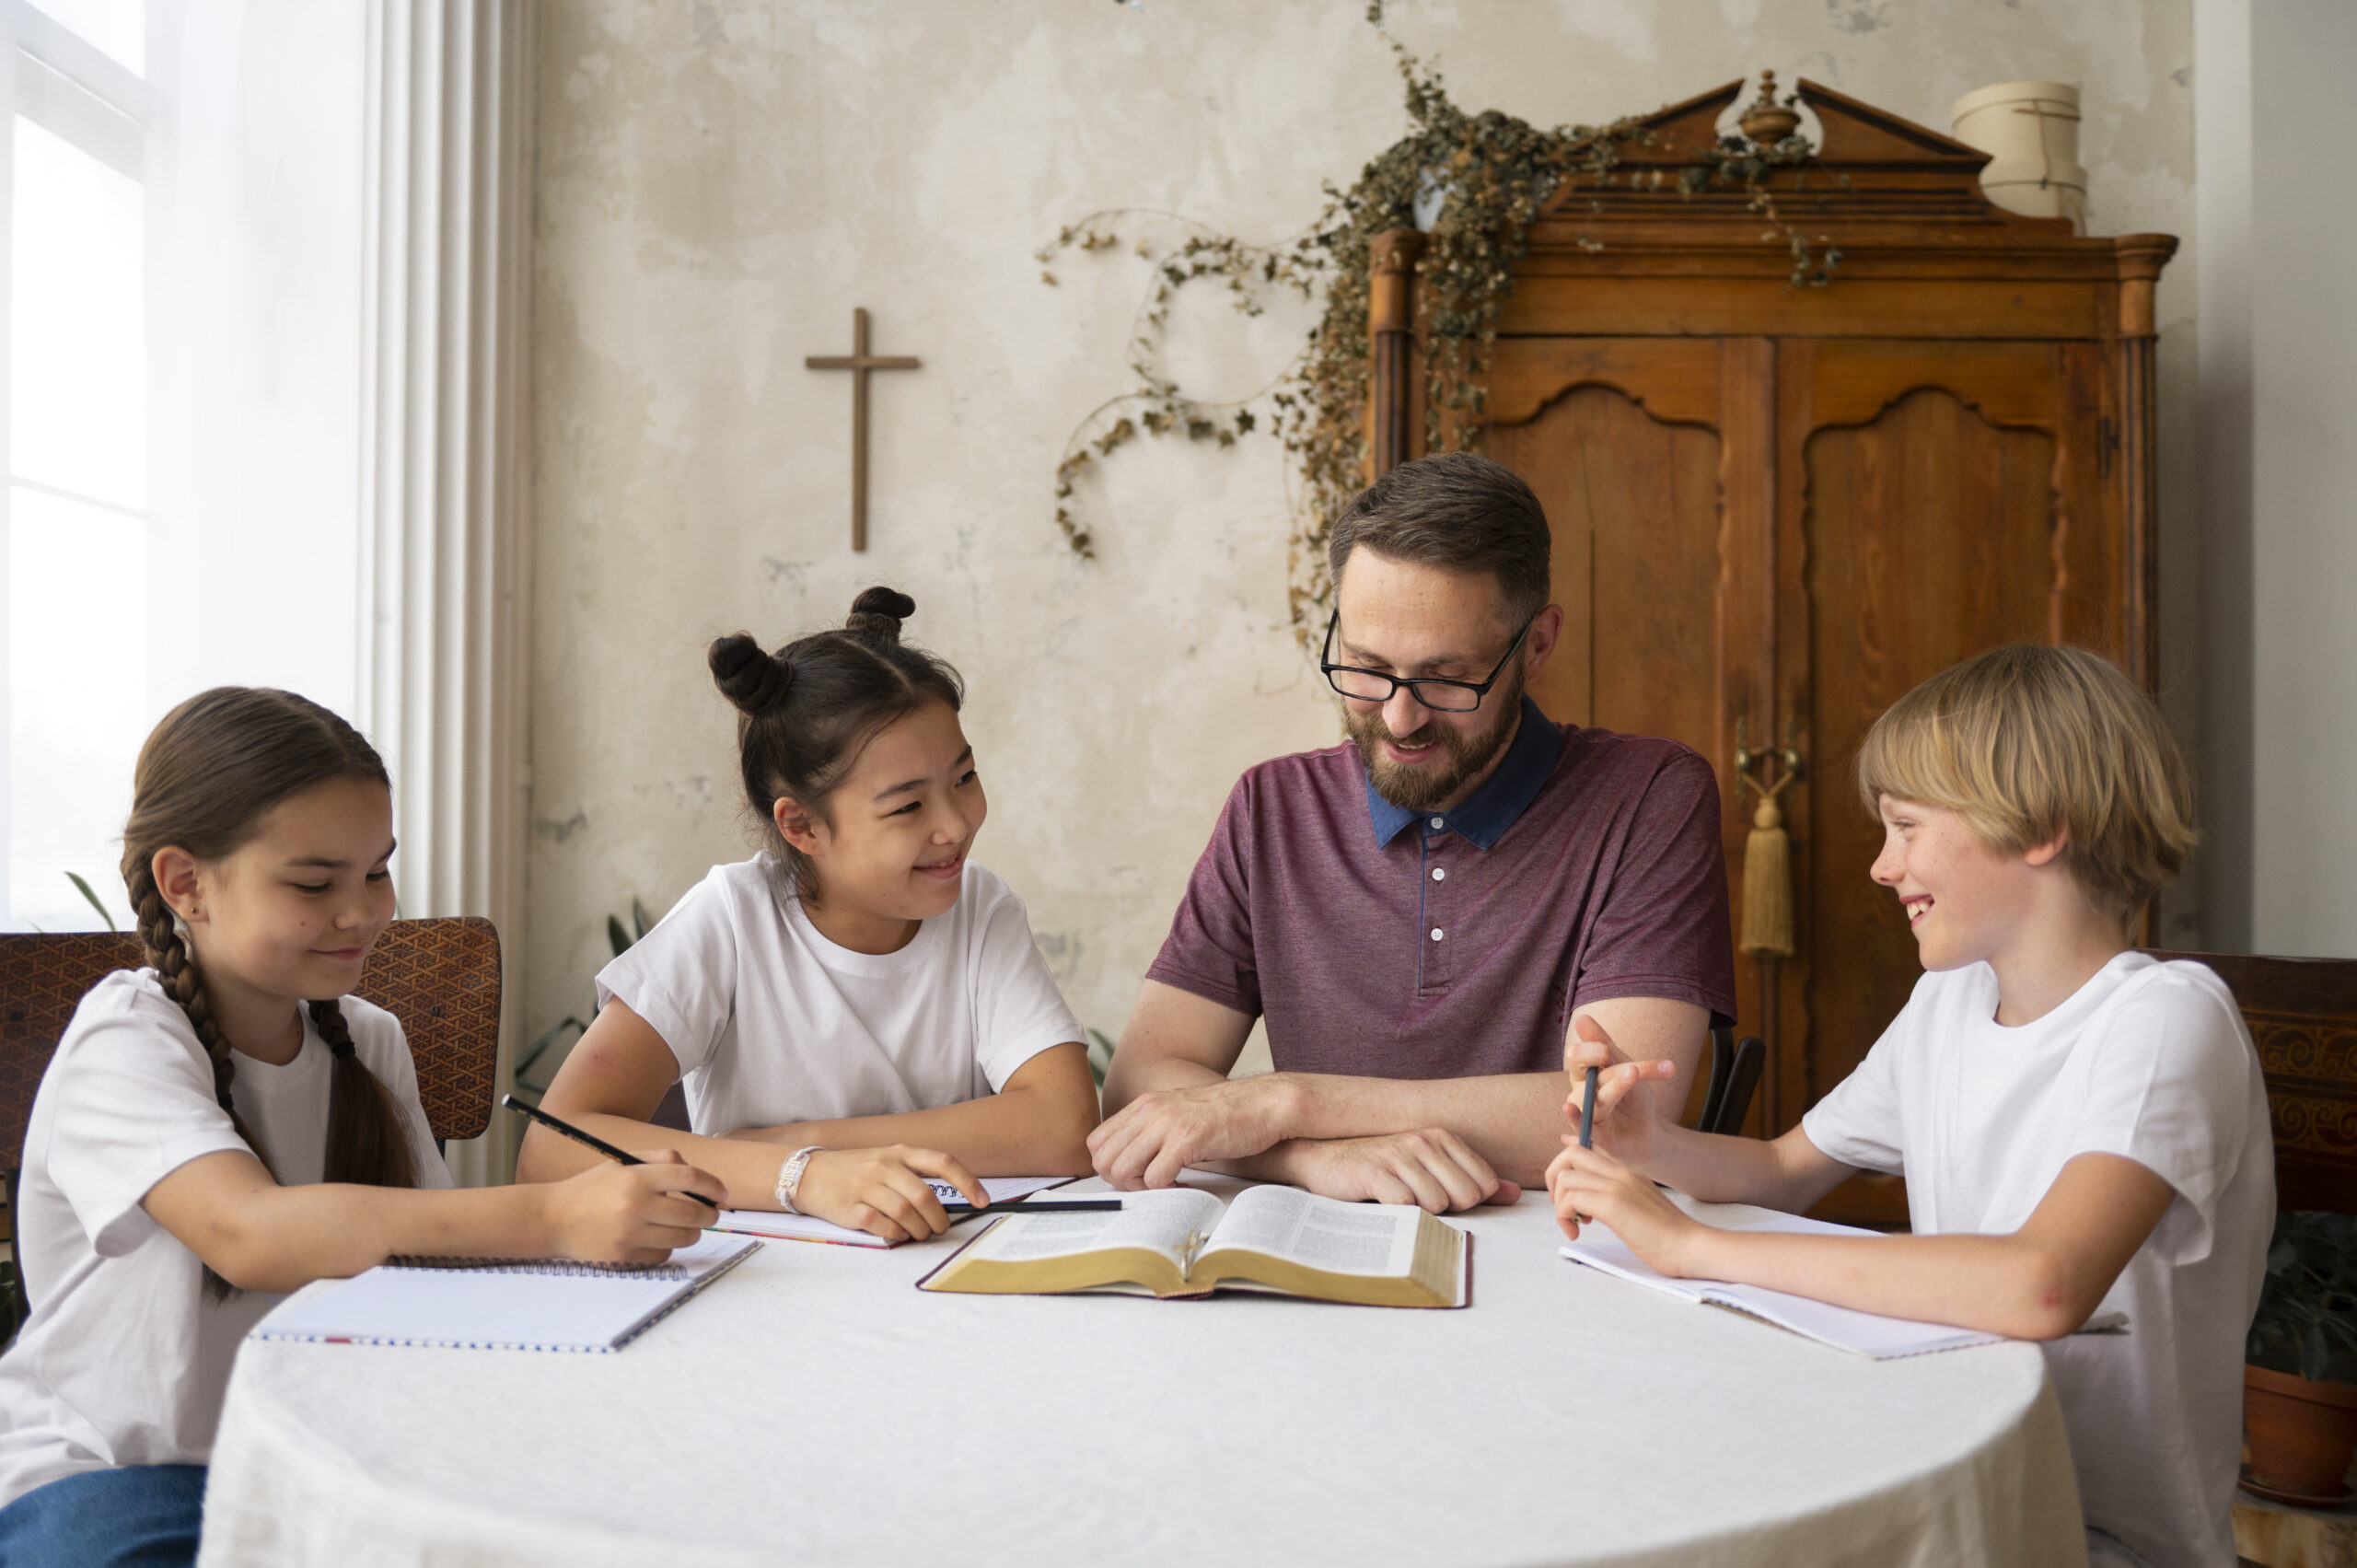 Diverse Activities Churches Near Me Offer for Families to Grow Spiritually Together